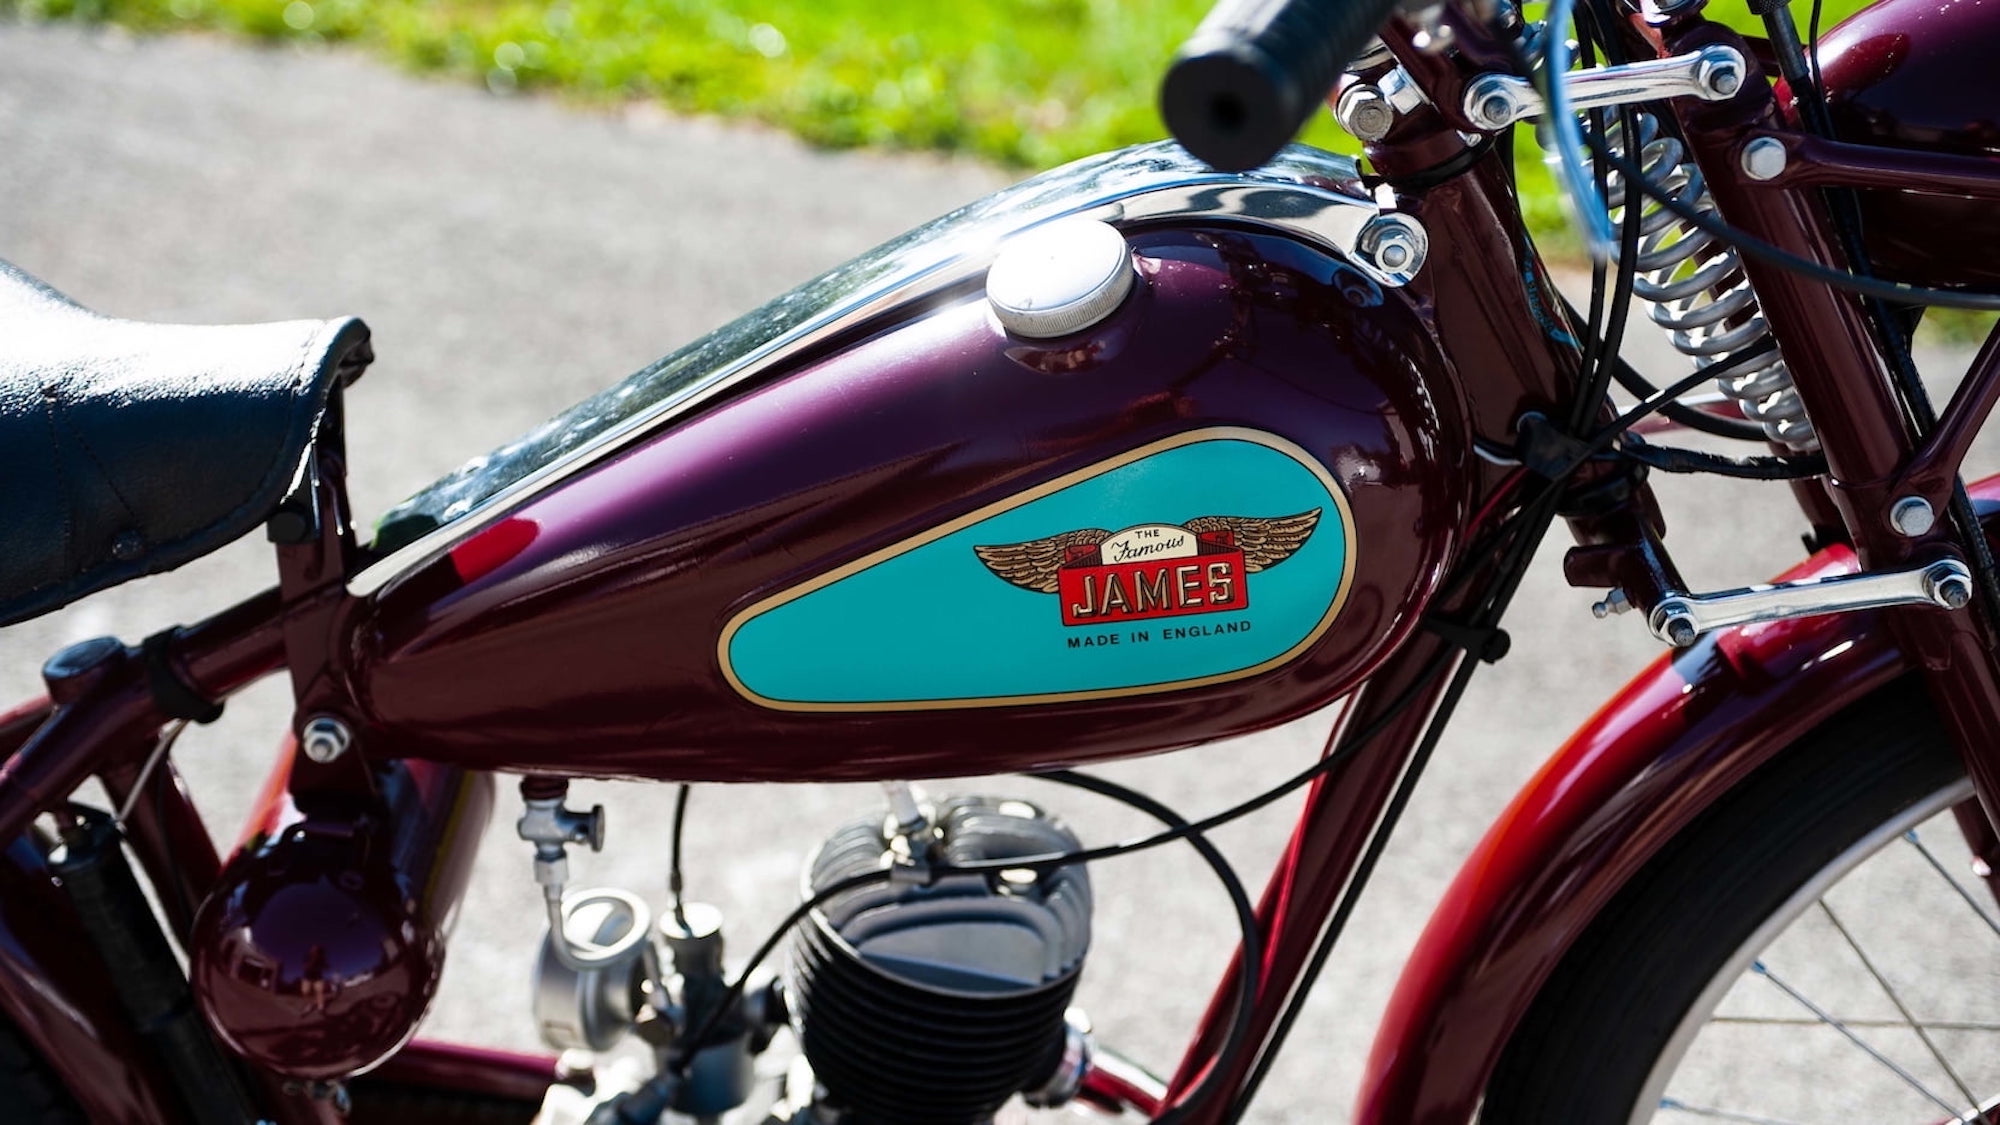 A Famous James motorbike. Media sourced from Mecum Auctions.